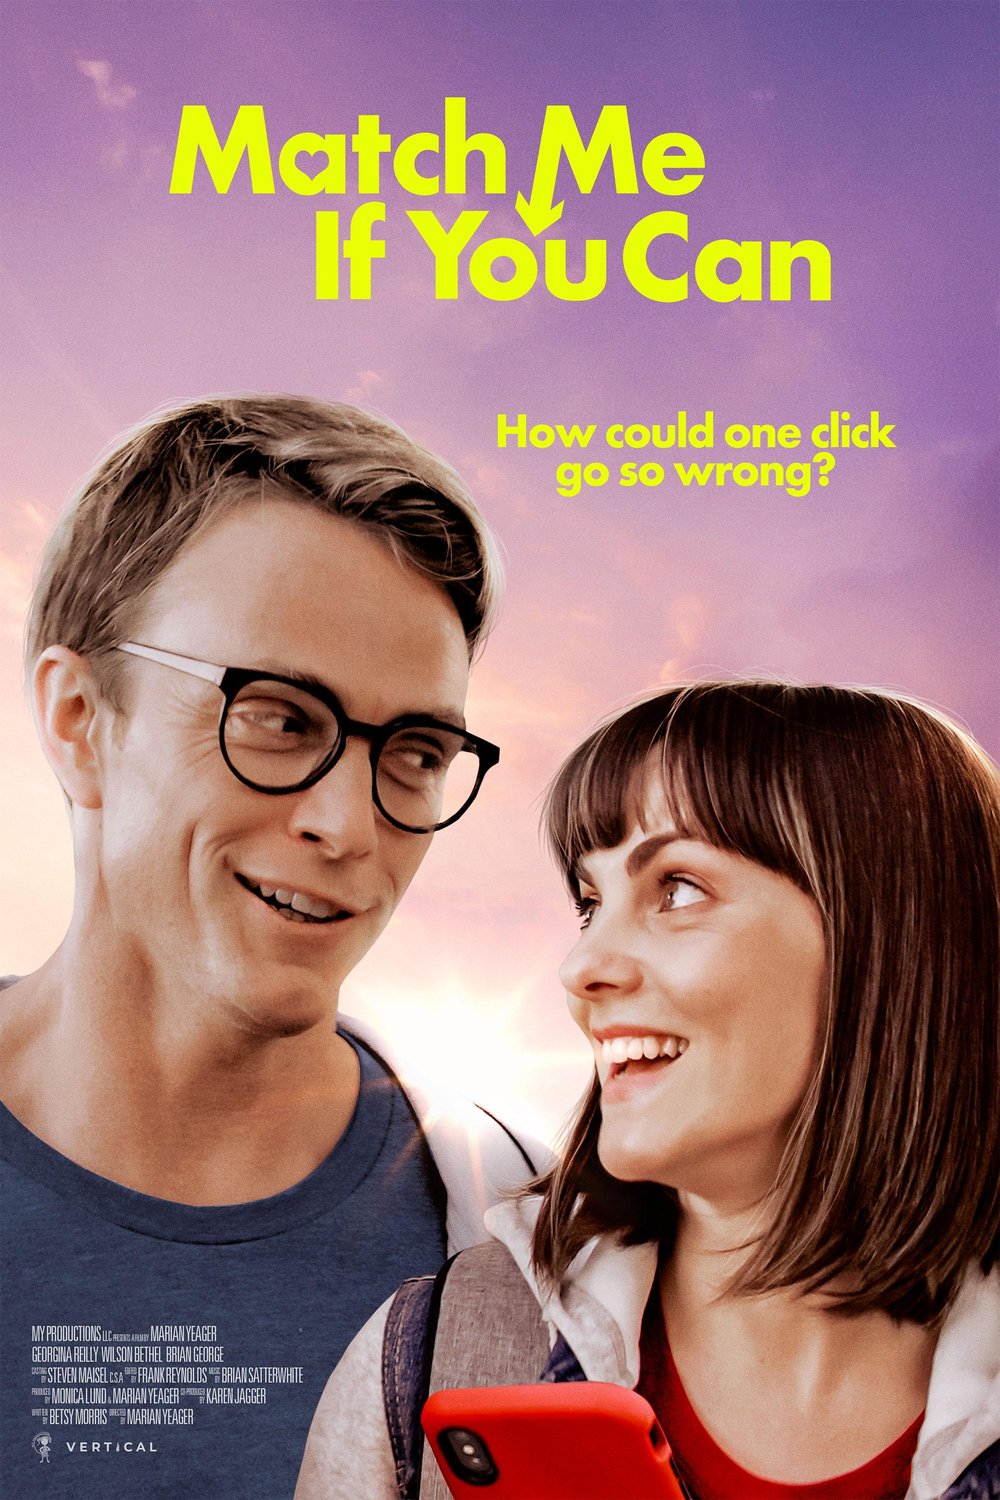 Poster of the movie Match Me If You Can